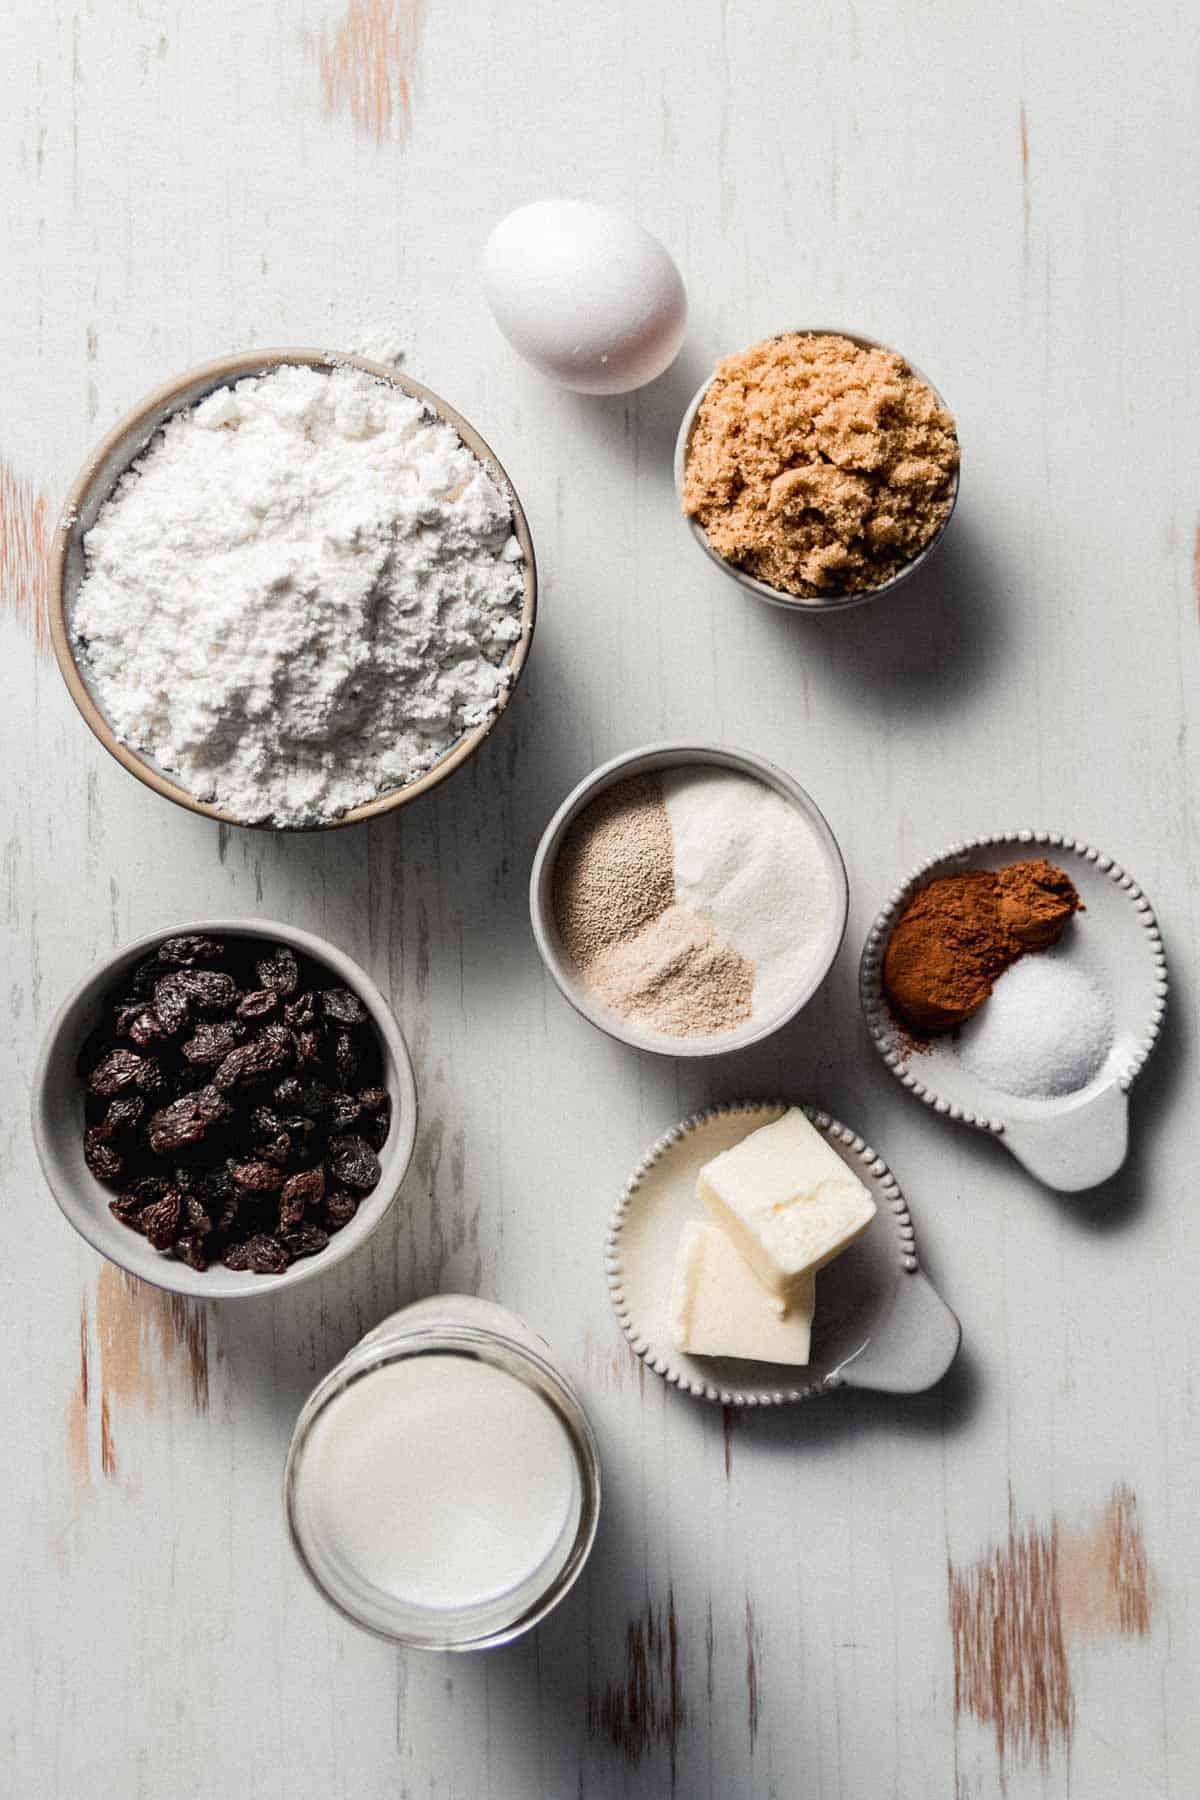 Ingredients measured in bowls including gluten-free flour, raisins, butter, sugar, egg, and spices.